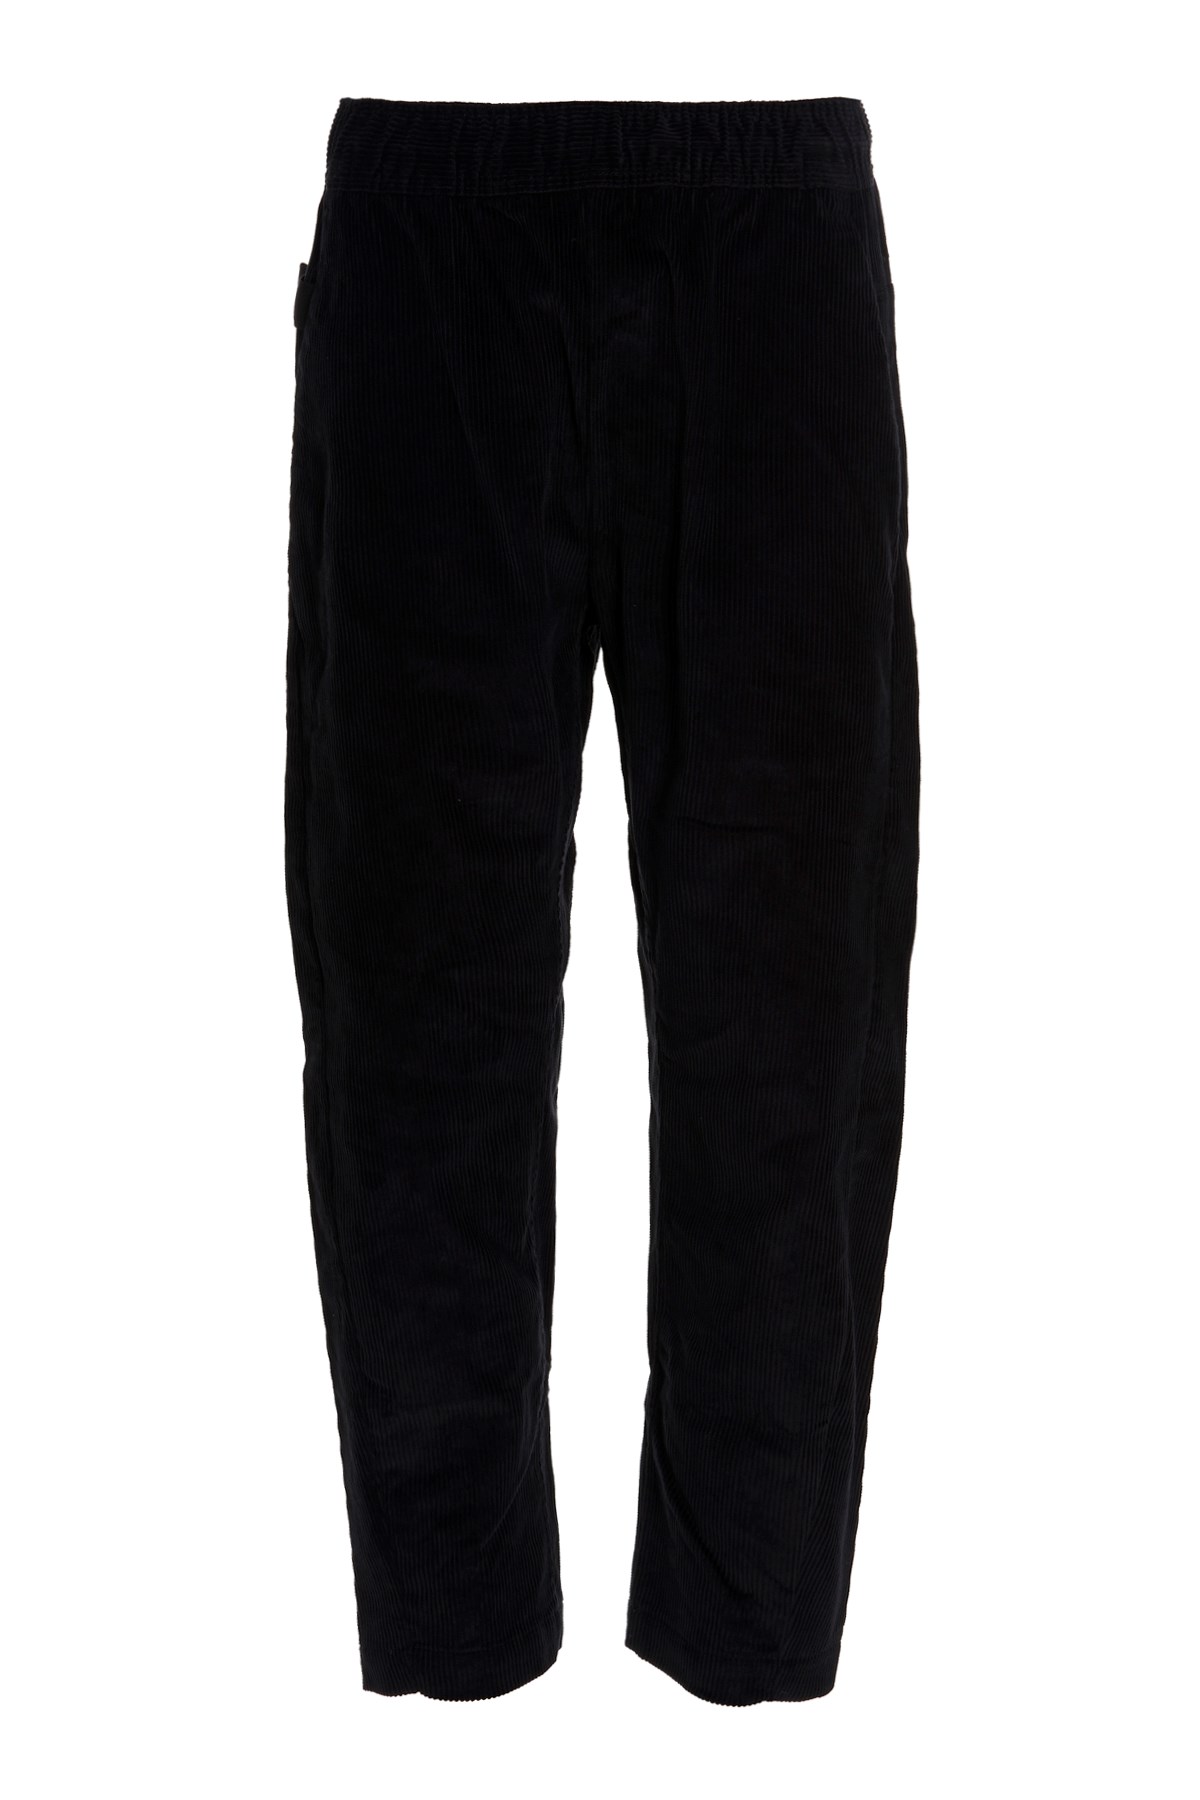 NIKE 'Nsw Lifestyle Crop’ Trousers